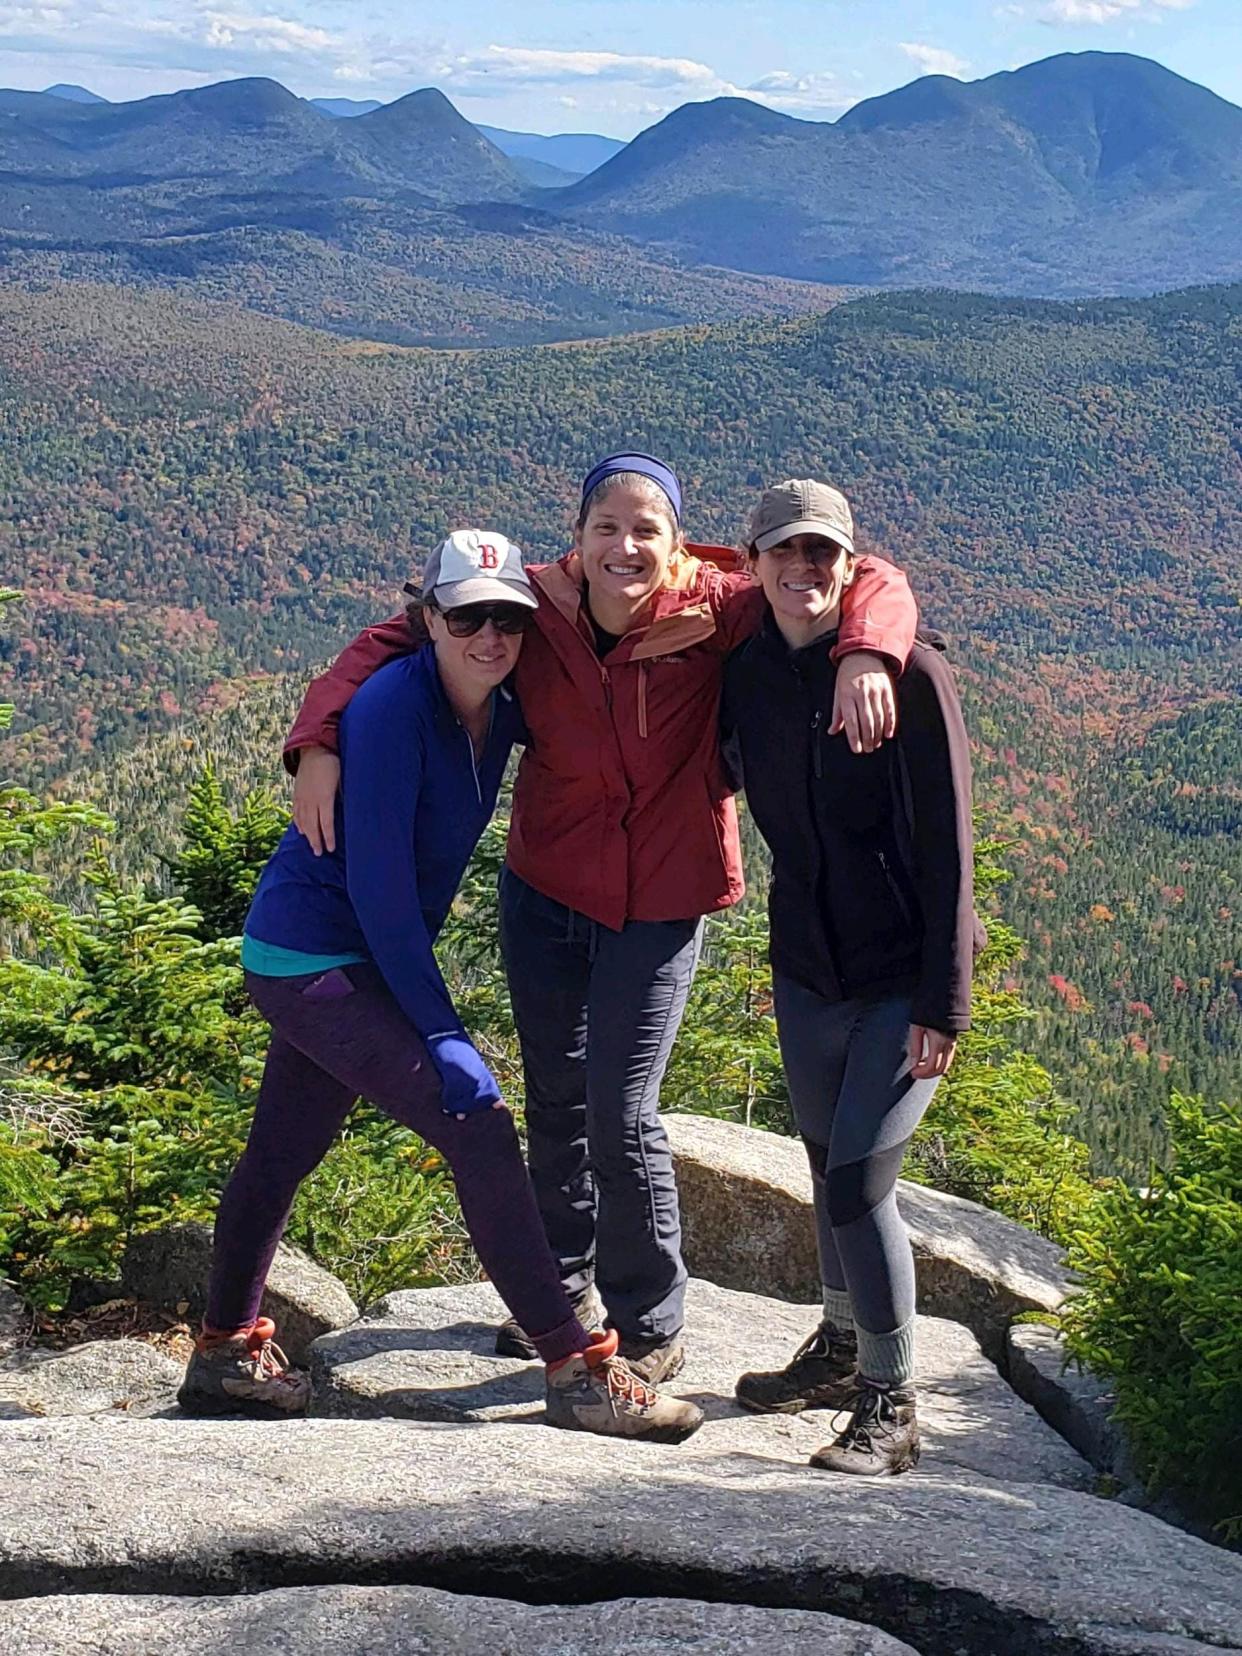 Erin Drew, Trish Castro and Micaela Quill on a hike in 2021. They are hiking four peaks in the White Mountains May 13 in support of their friend Rosie, who is battling a rare form of cancer.